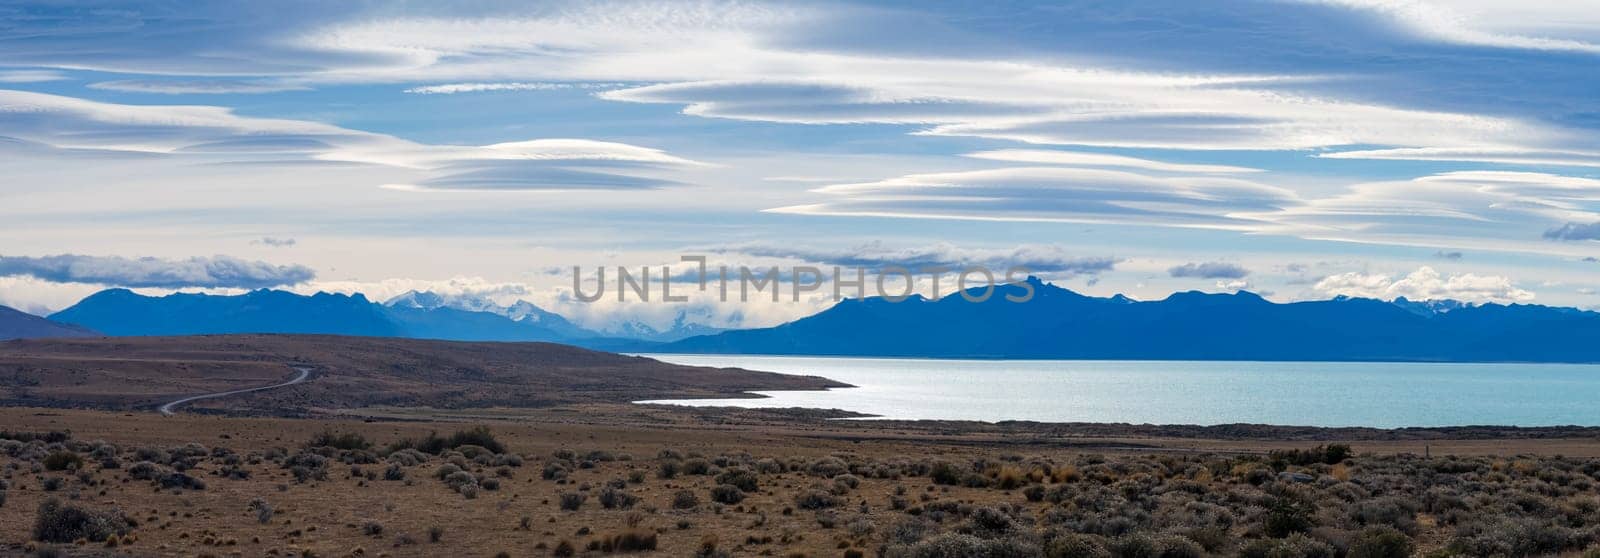 Expansive Patagonian Landscape with Lenticular Clouds and Lake by FerradalFCG